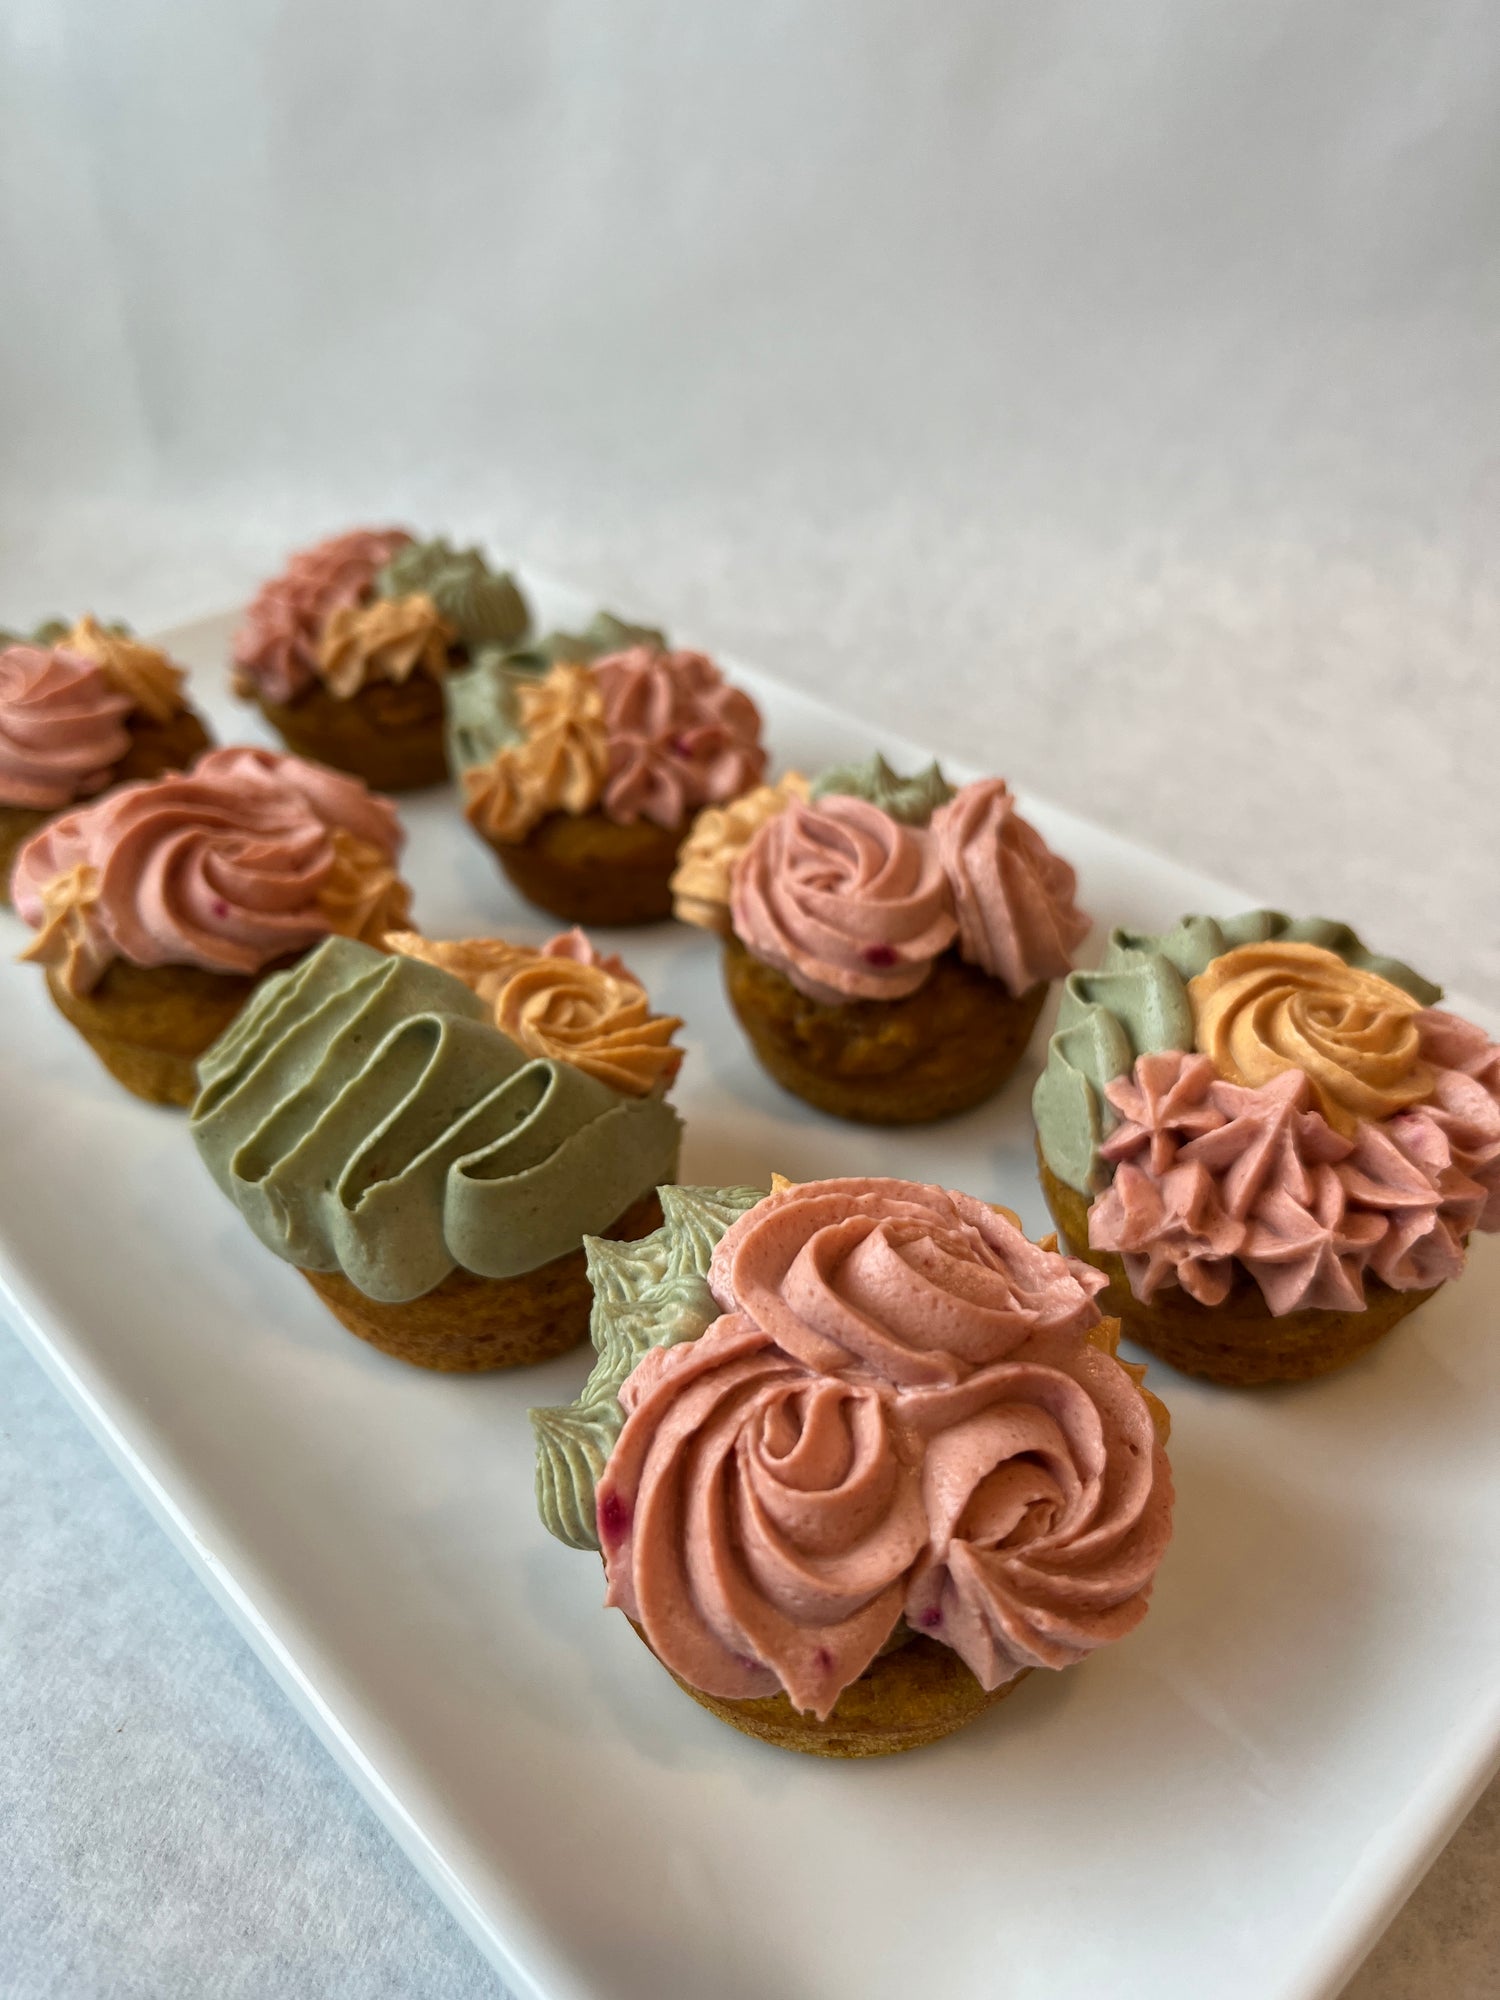 Mini custom dog cupcakes with mixed flower design (pink, green, and yellow icing). 